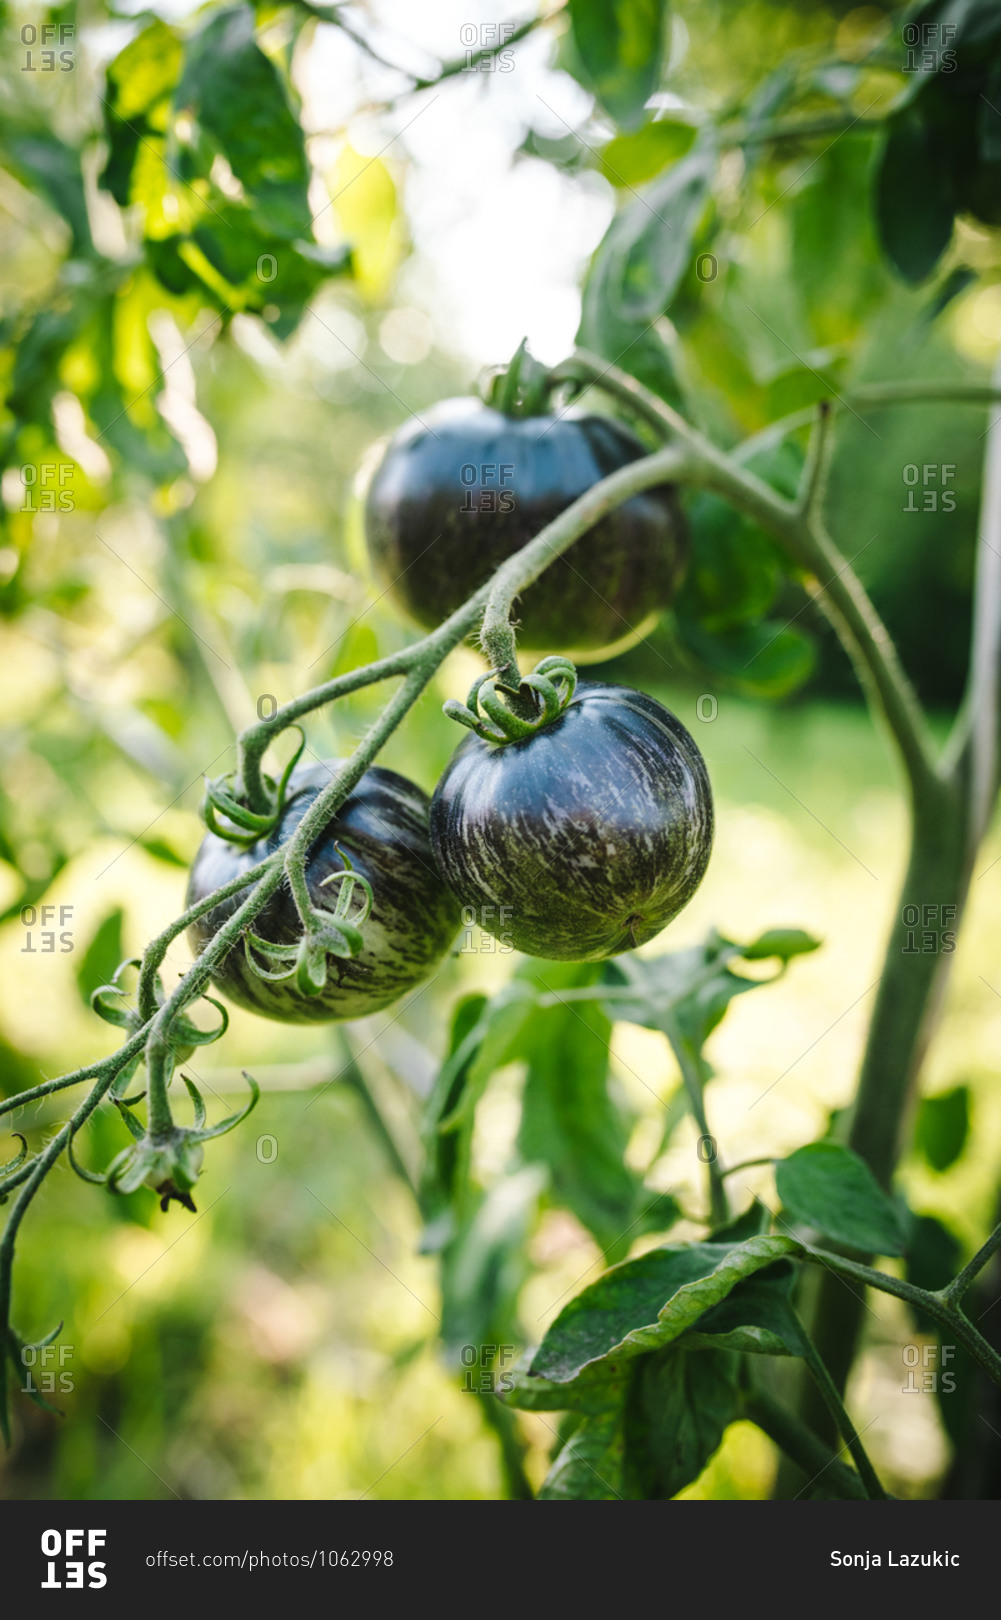 Black tomatoes ripening on a vine in a garden